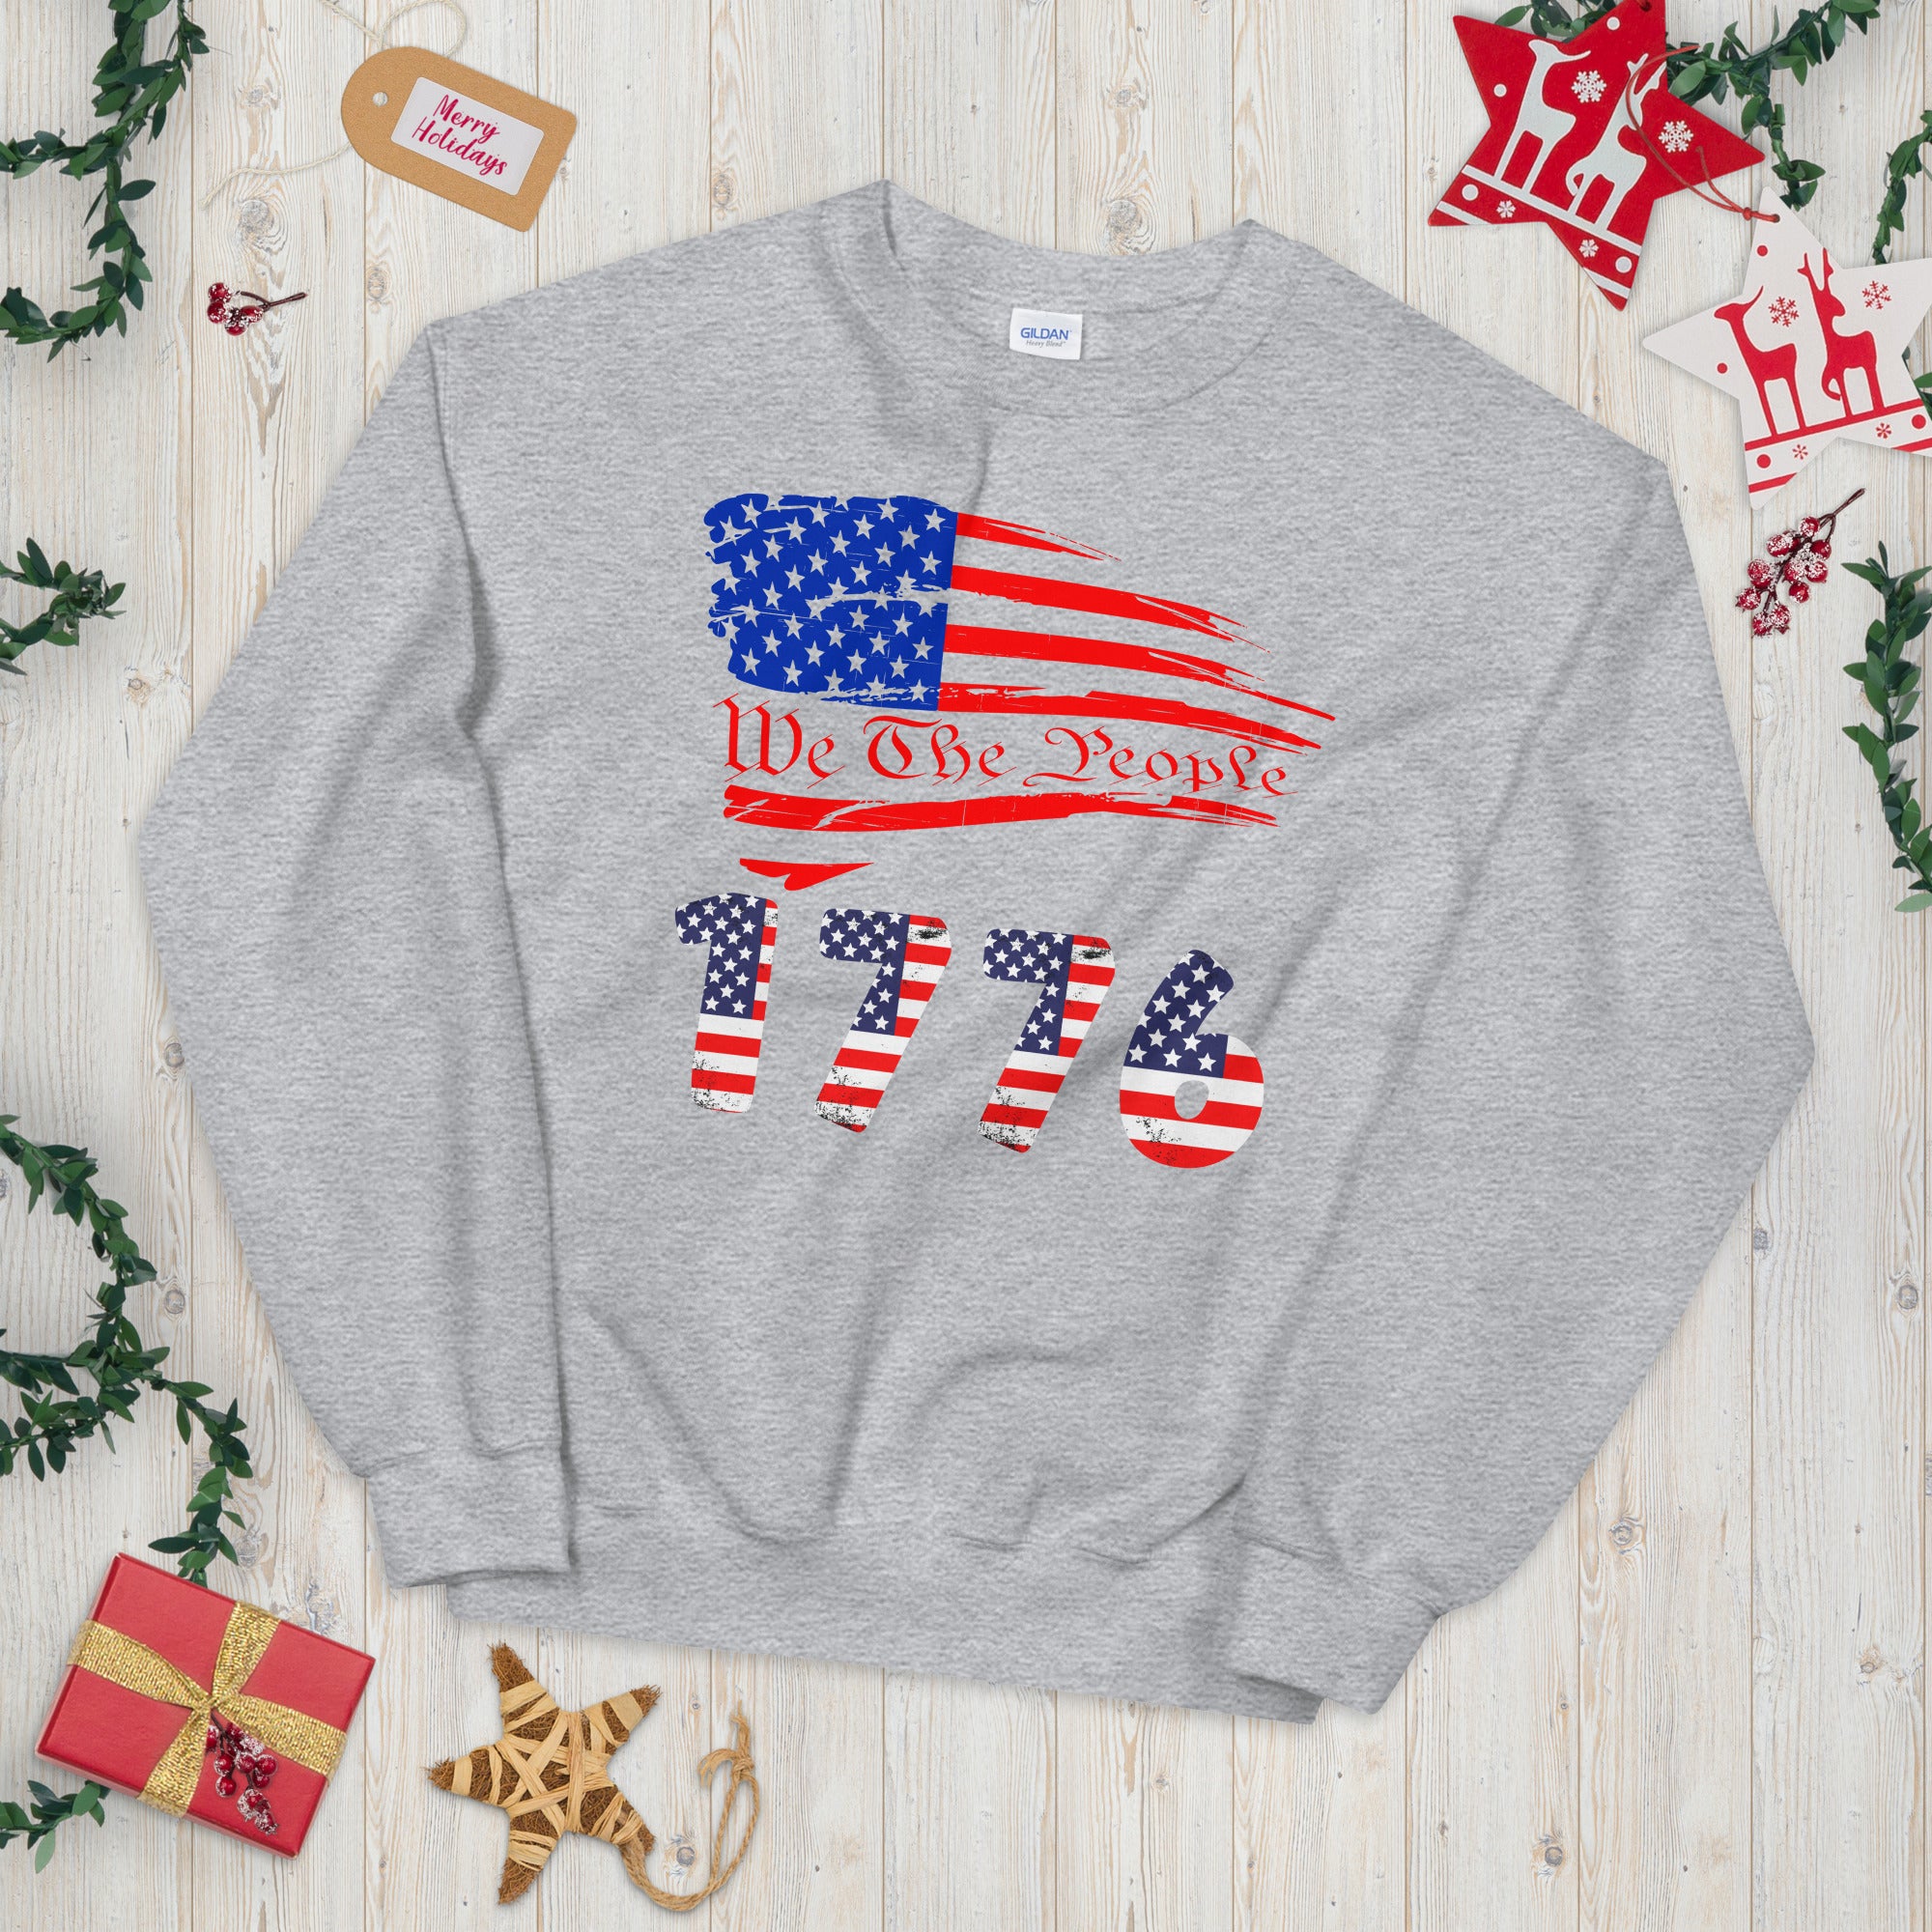 We The People Sweatshirt, 1776 Sweater, Patriotic Shirt, Fourth of July, USA American Flag, American Pride, American Patriot Gifts - Madeinsea©